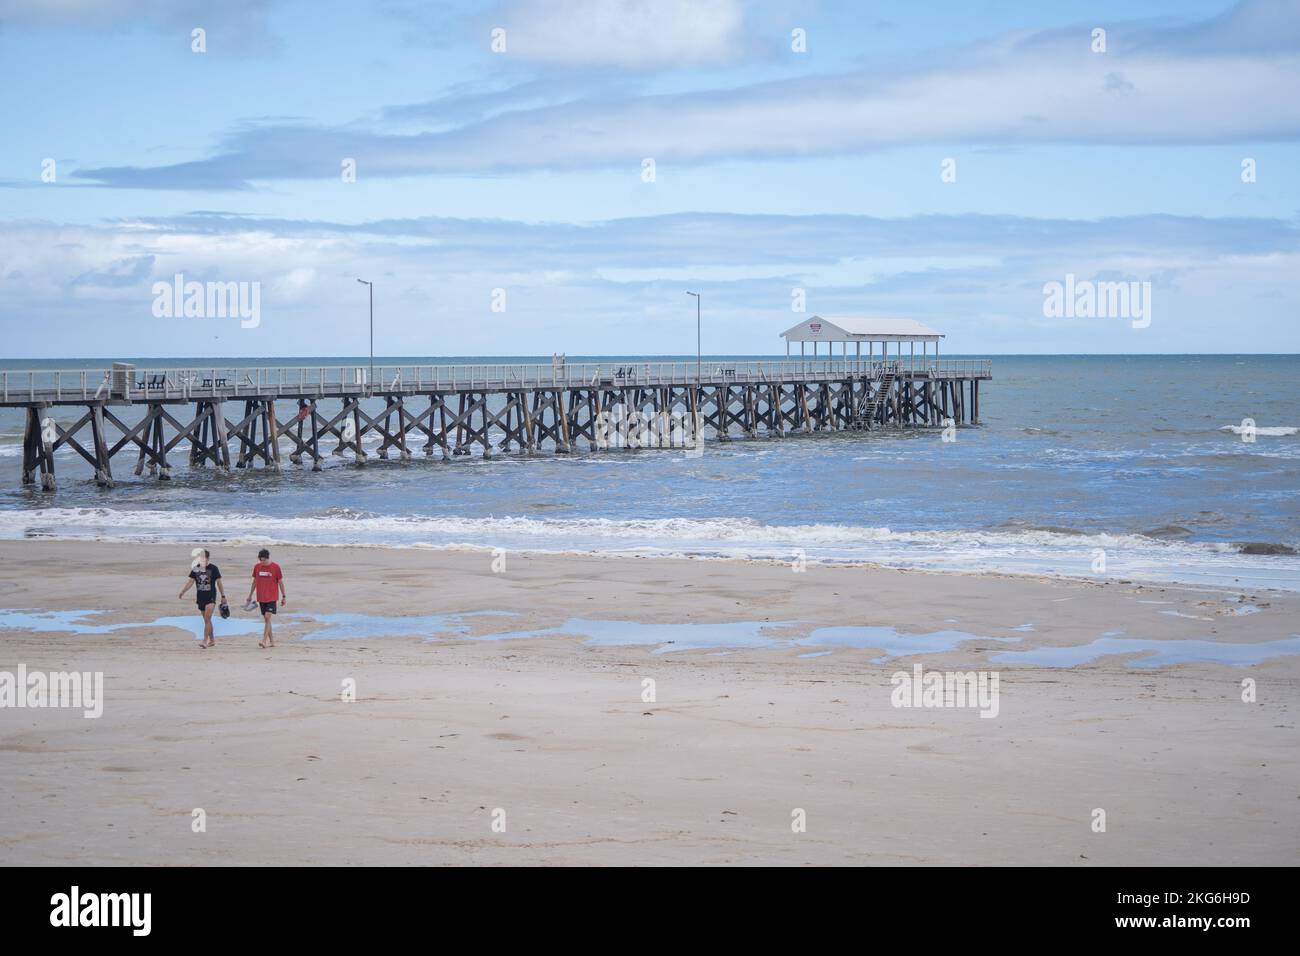 Adelaide, Australia. 22 November 2022.  Swimmers  on deserted beach in Adelaide, South Australia  on a mild sunny day following several days of unsettled weather  with below average temperatures for November. Credit: amer ghazzal/Alamy Live News Stock Photo